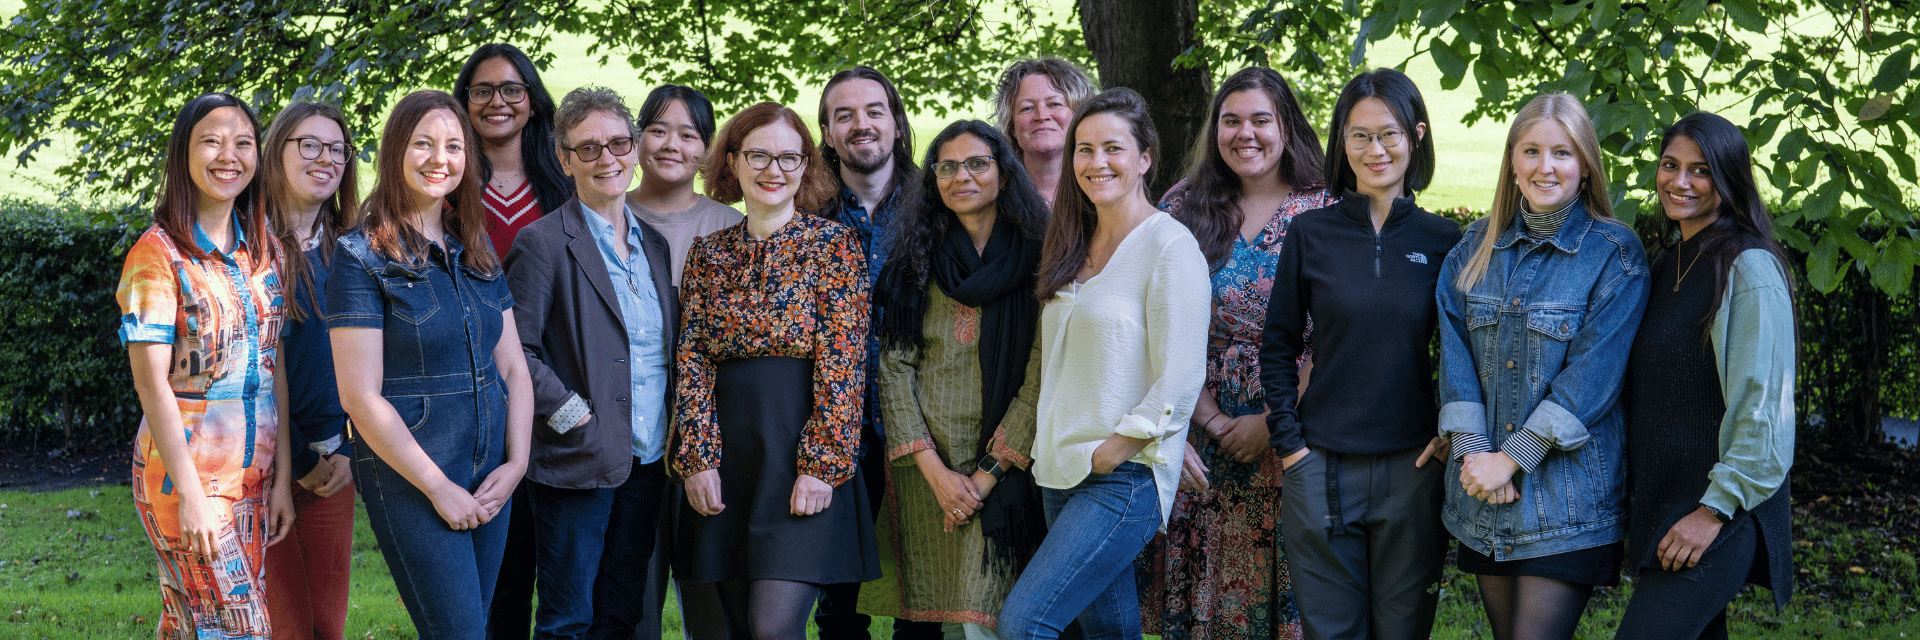 A group photo of the Centre for Research into Violence and Abuse's team